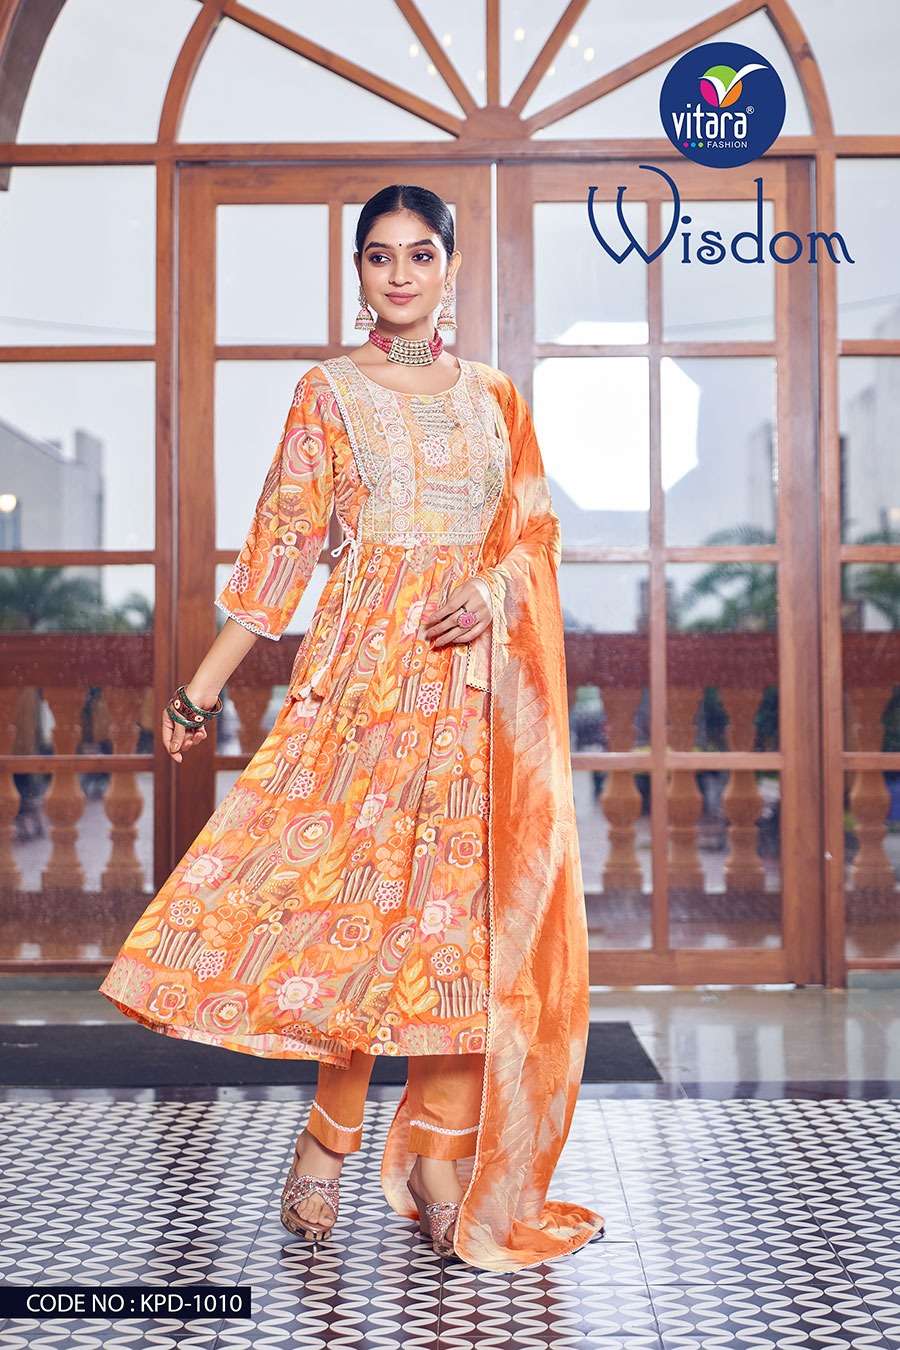  WISDOM HEAVY REYON FOIL PRINT WITH EMBROIDERY WORK KURTI WITH PANT AND DUPATTA BY VITARA BRAND WHOL...